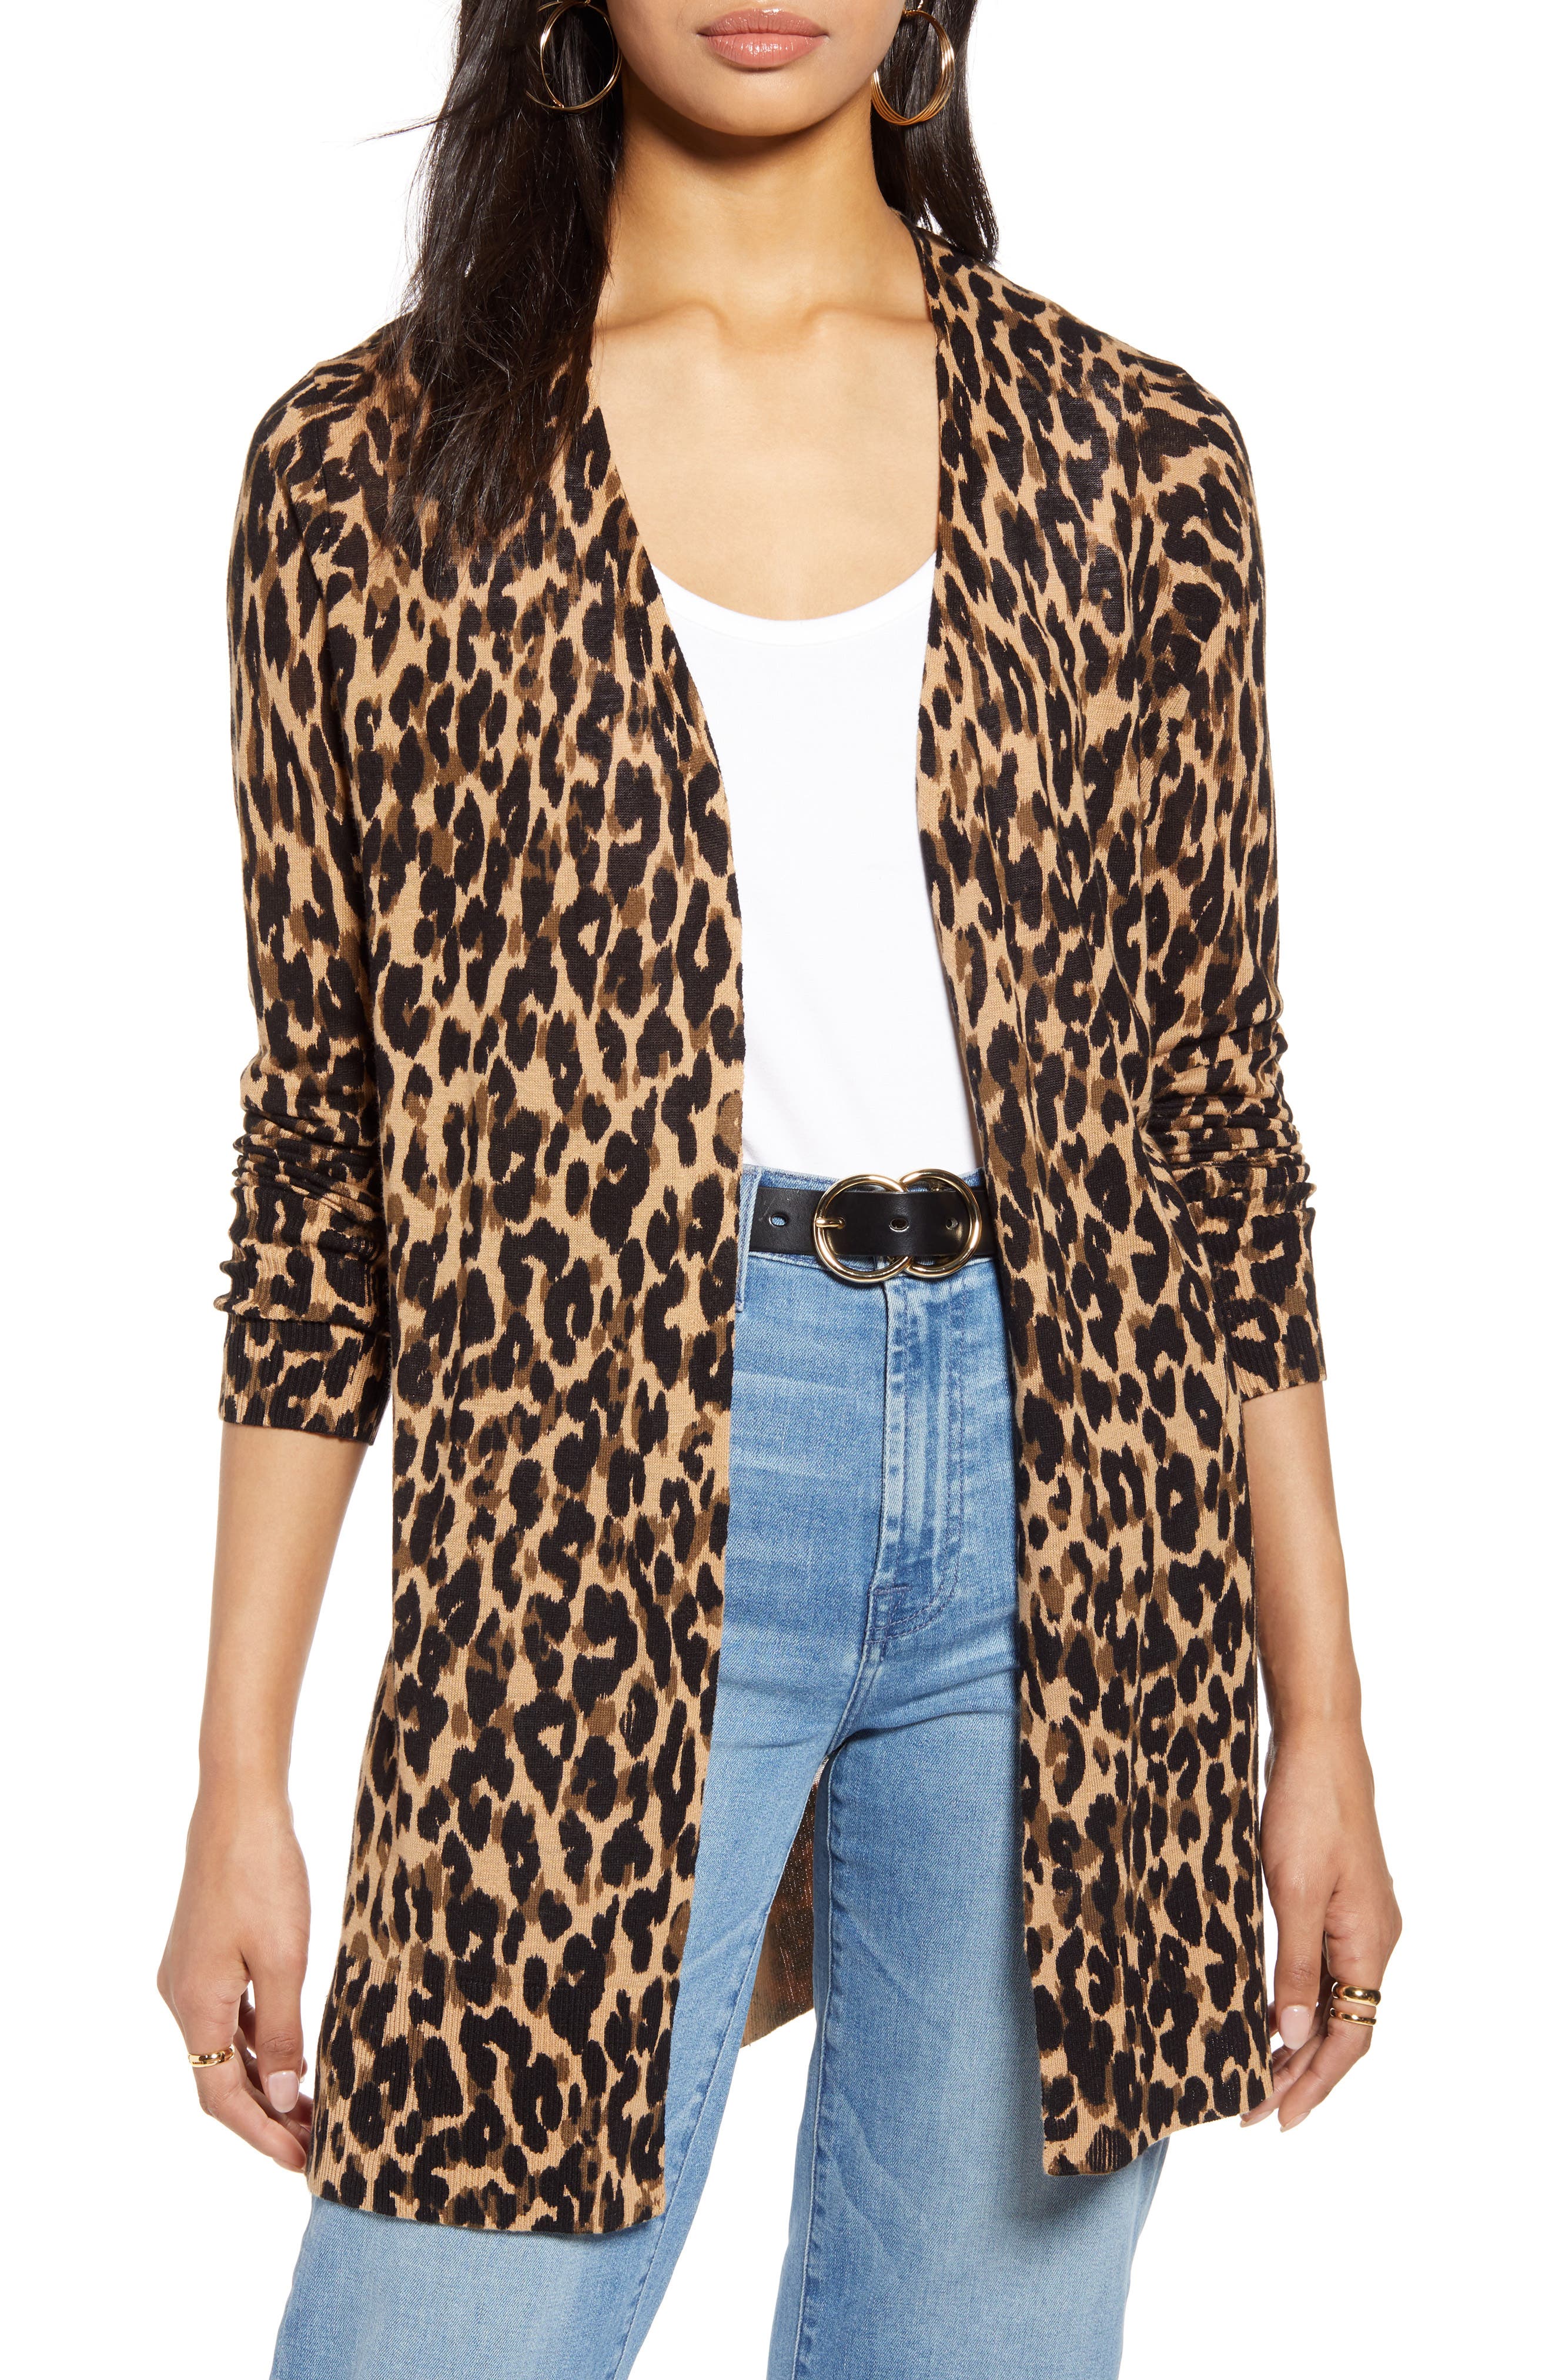 Betty Basics Leopard Print Zip Up Vest with Hoodie Sizes 8 SALE 70% Off 12 10 